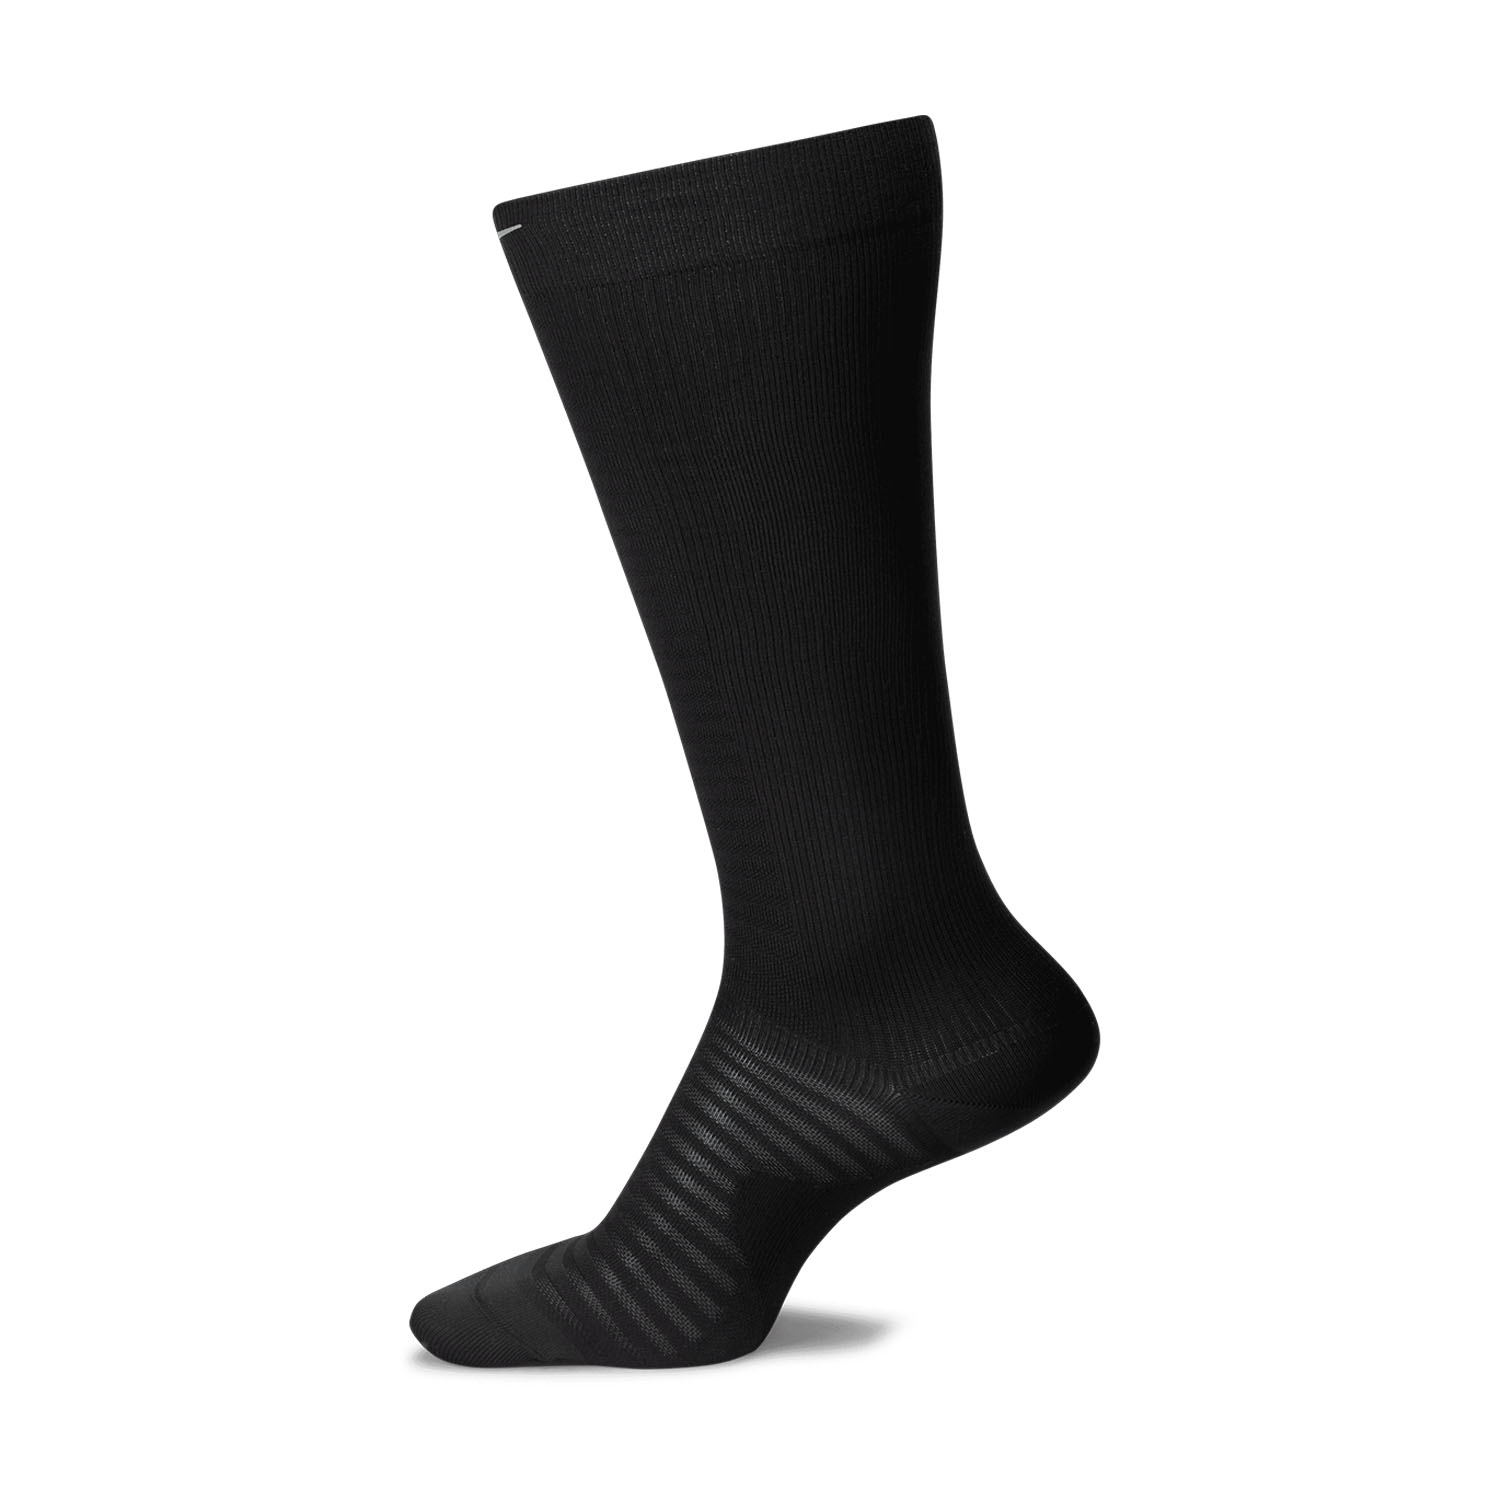 Nike Dri-FIT Spark Lightweight Calcetines - Black/Reflective Silver